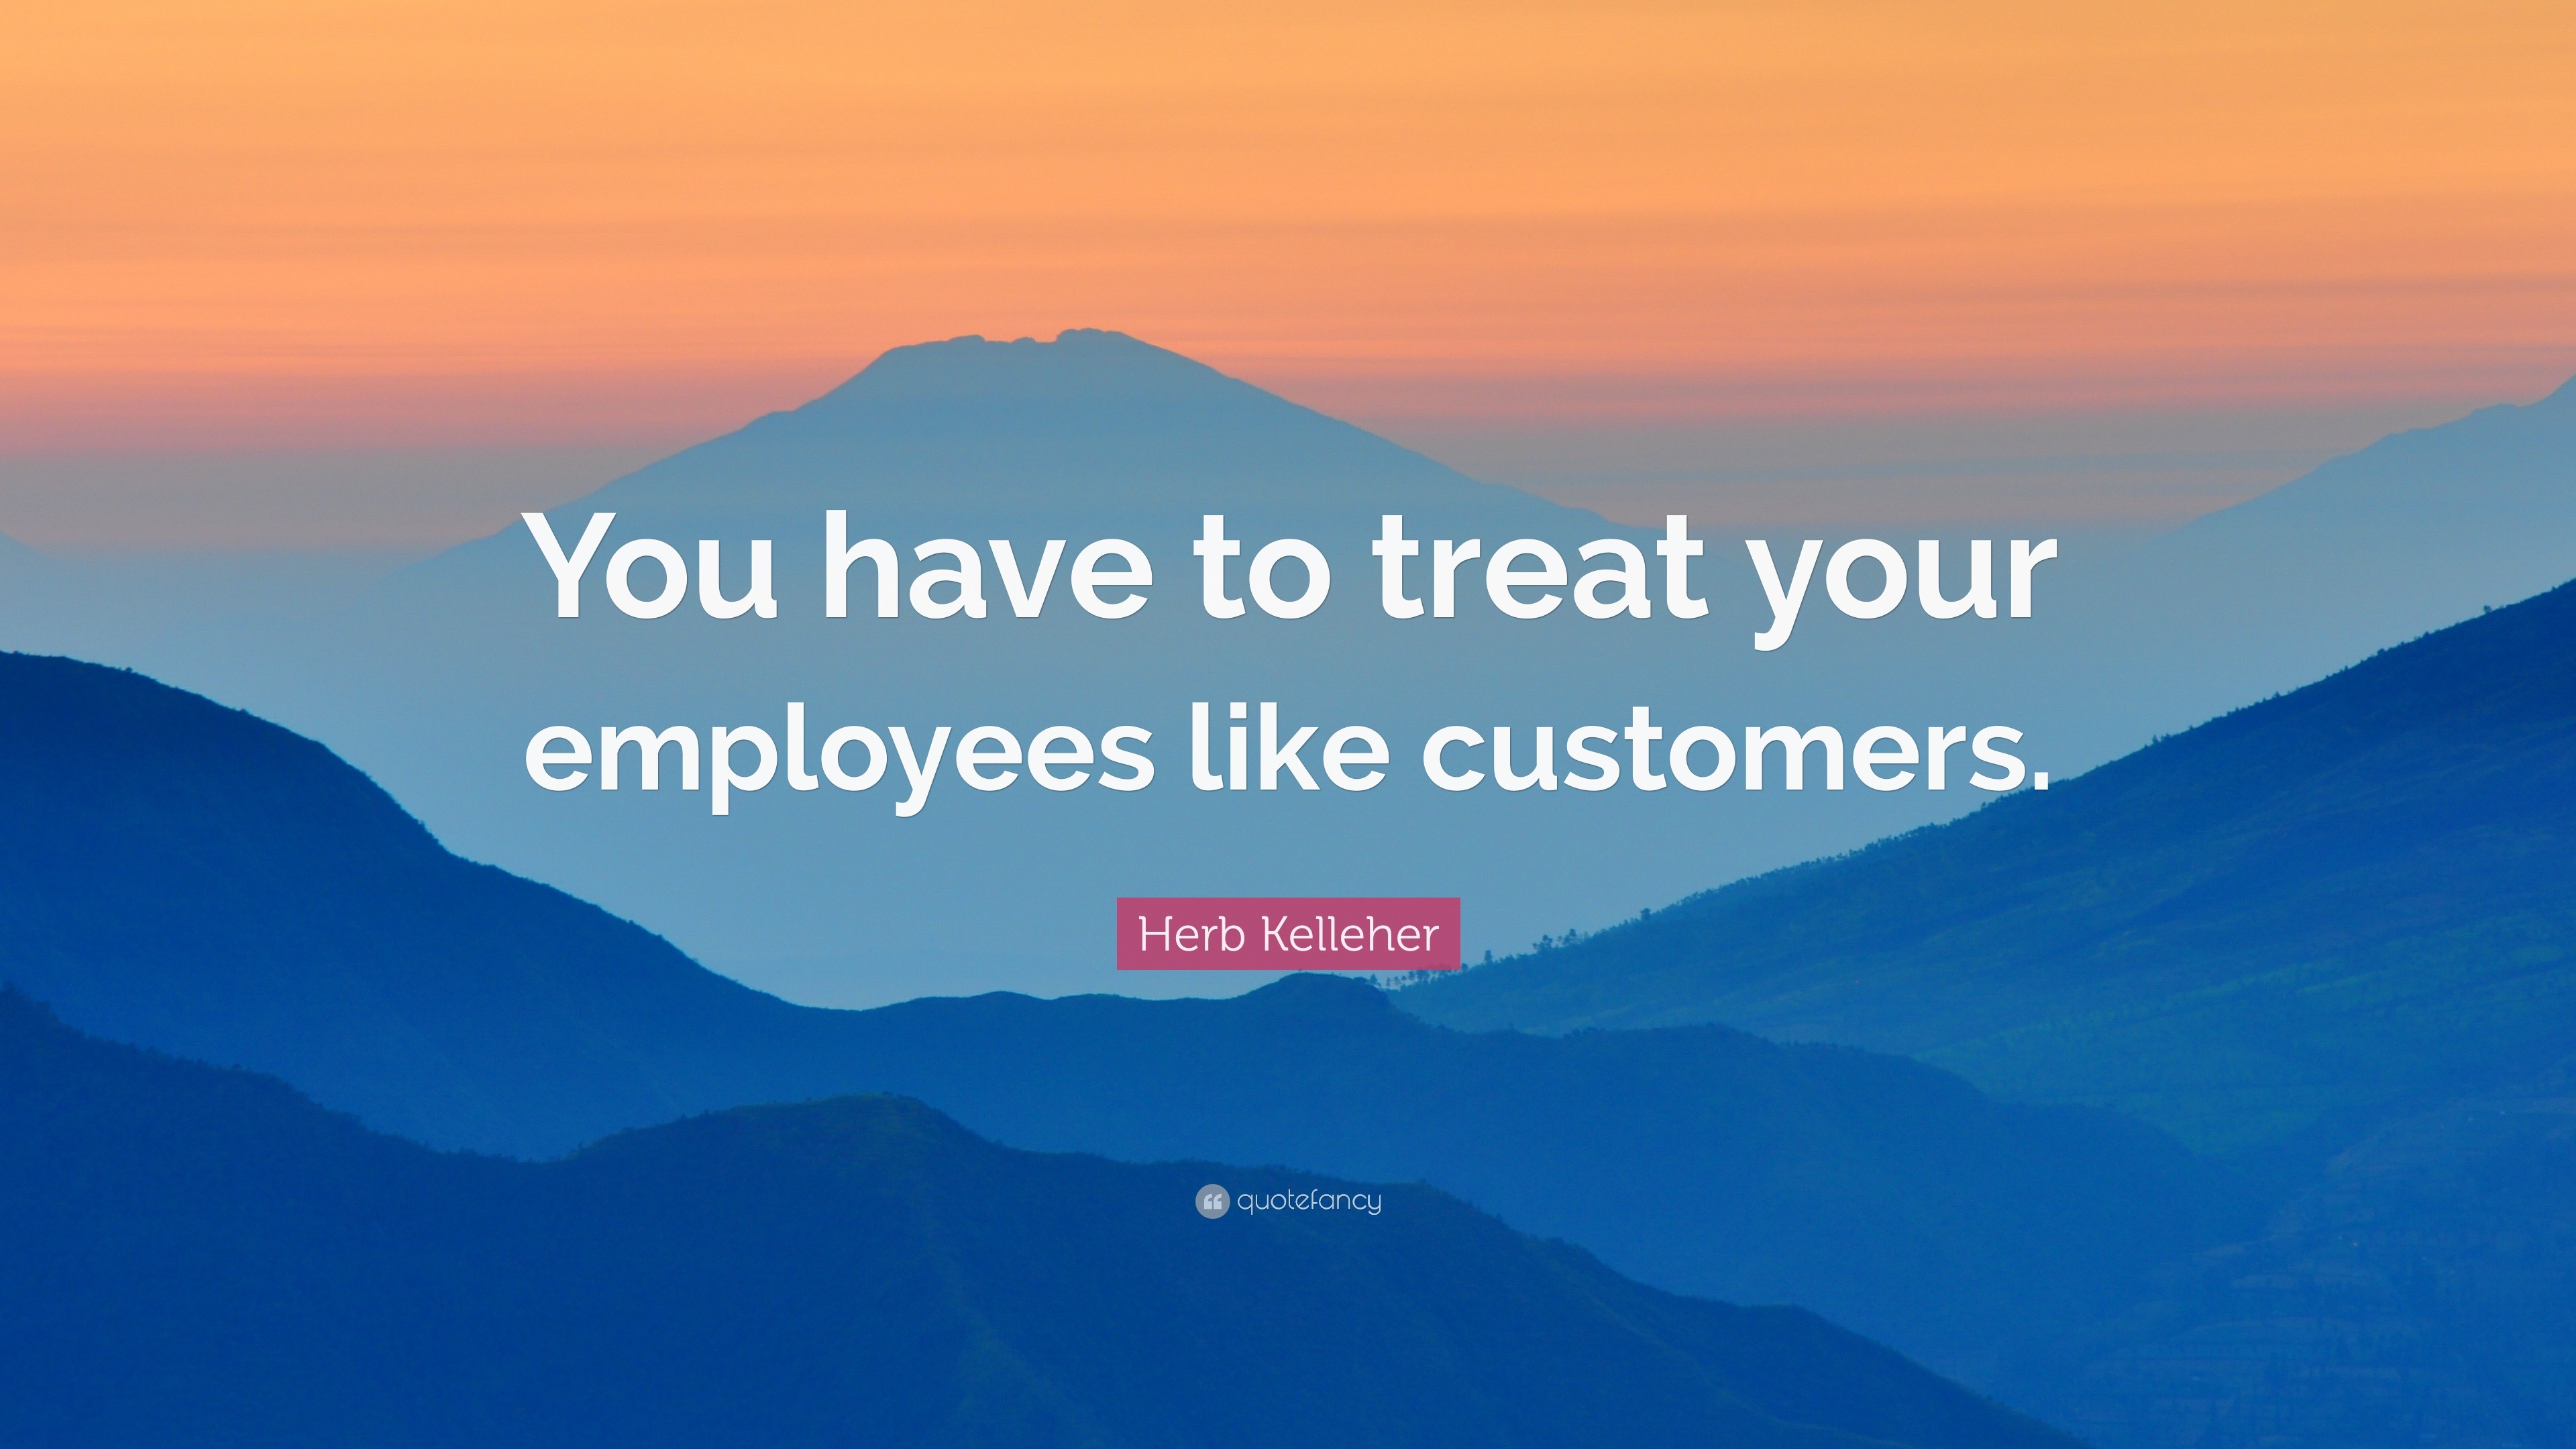 Herb Kelleher Quote: “You have to treat your employees like customers